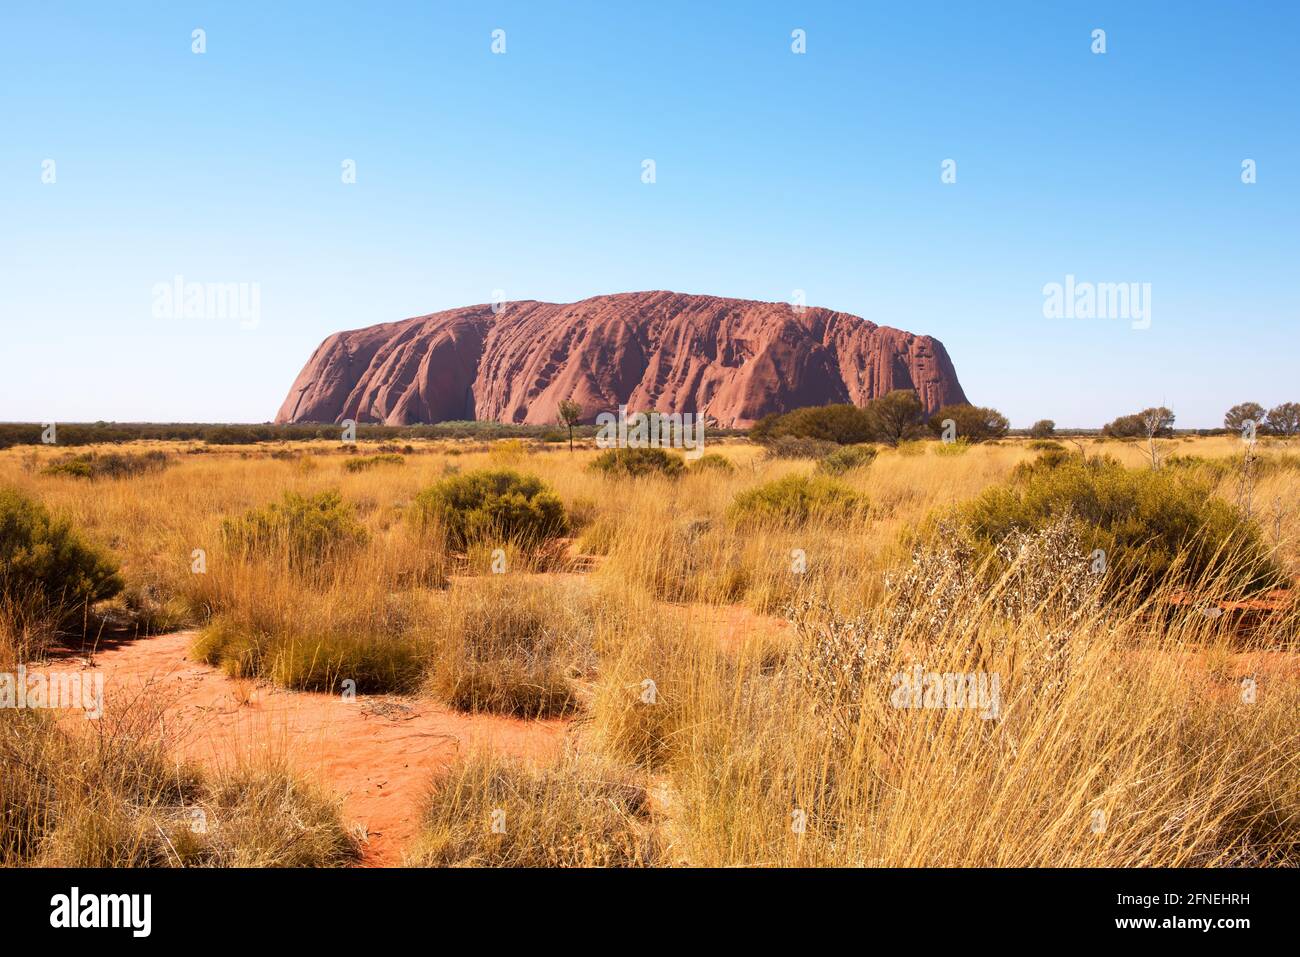 Uluru (Ayers Rock), Northern Territory, Australia, September 2018.  This imposing geological structure is the world's largest rock monolith. Stock Photo